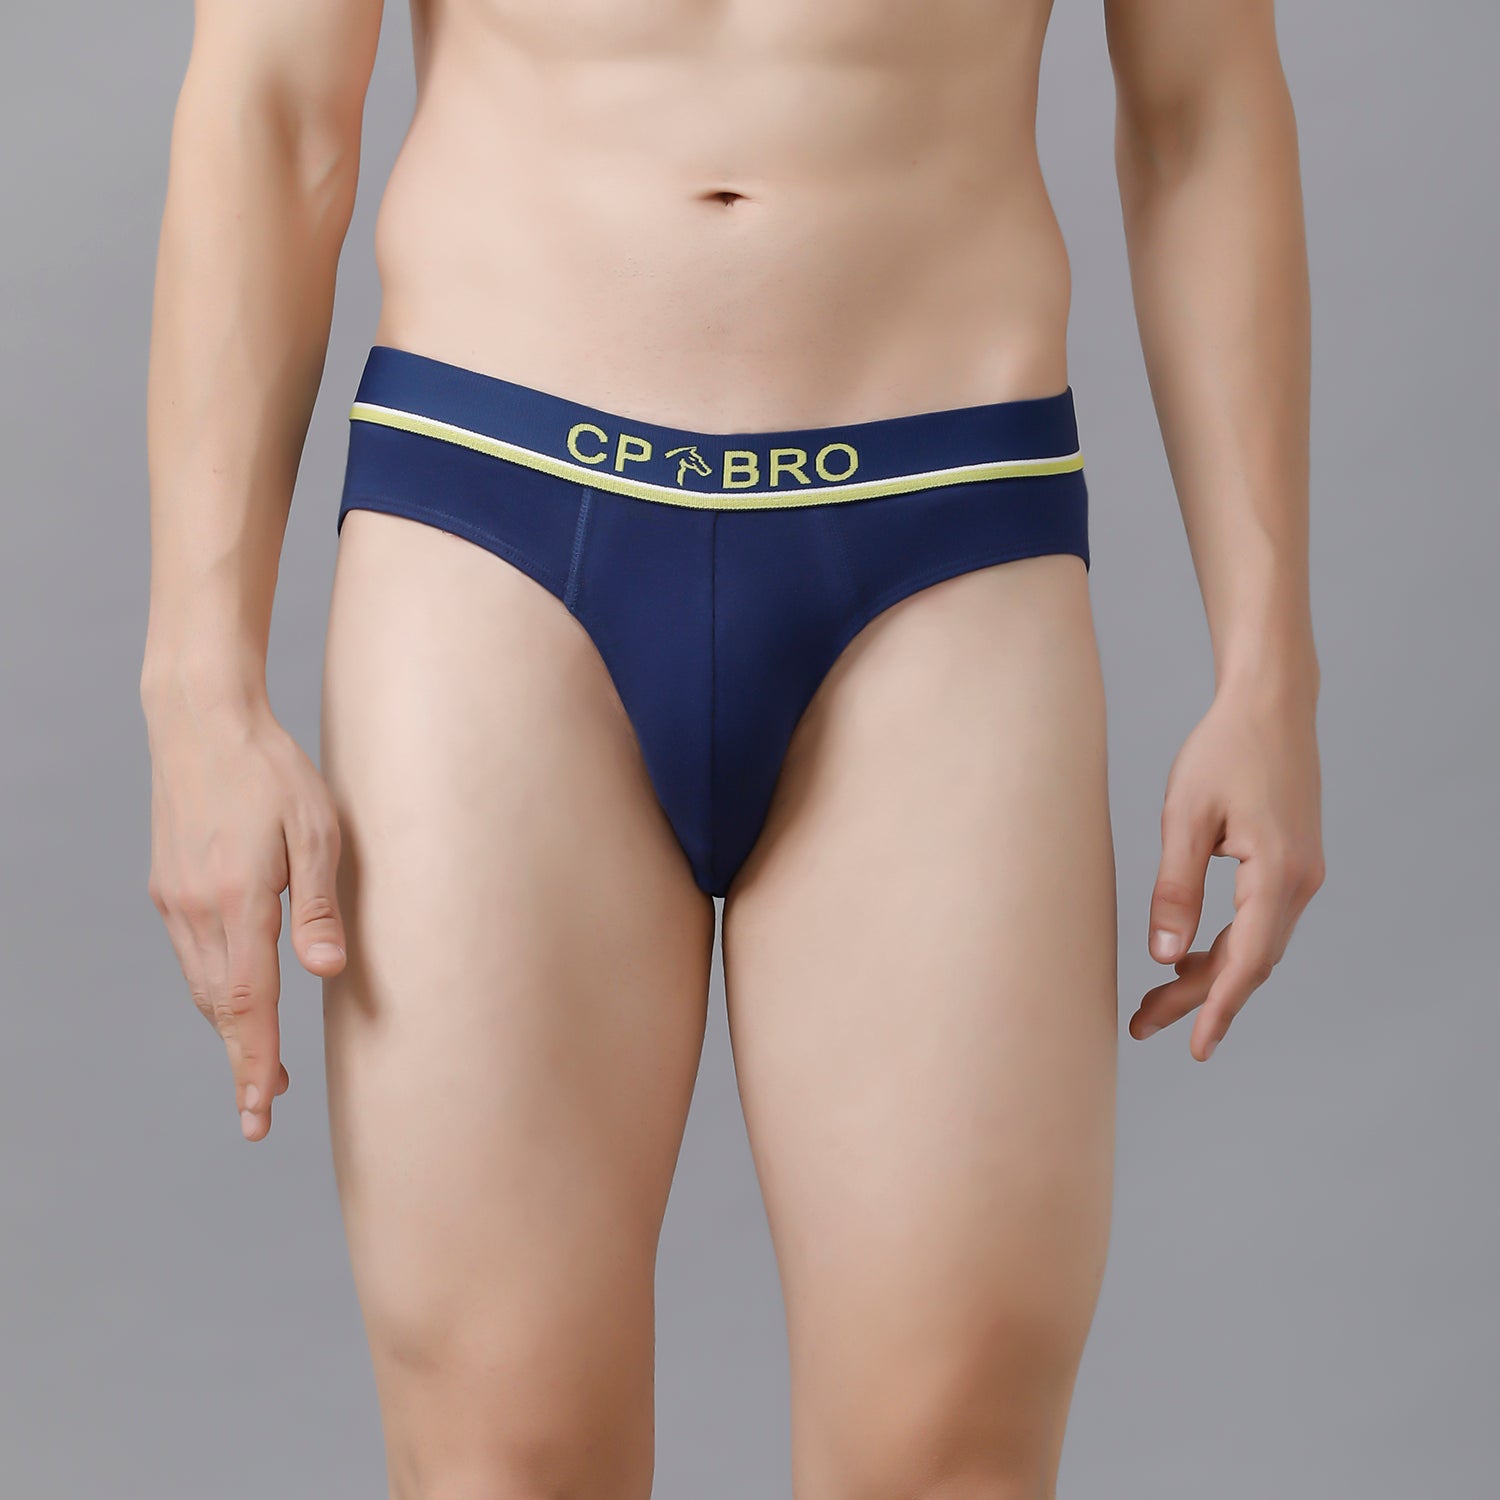 Buy CP BRO Printed Briefs with Exposed Waistband Value - Grey